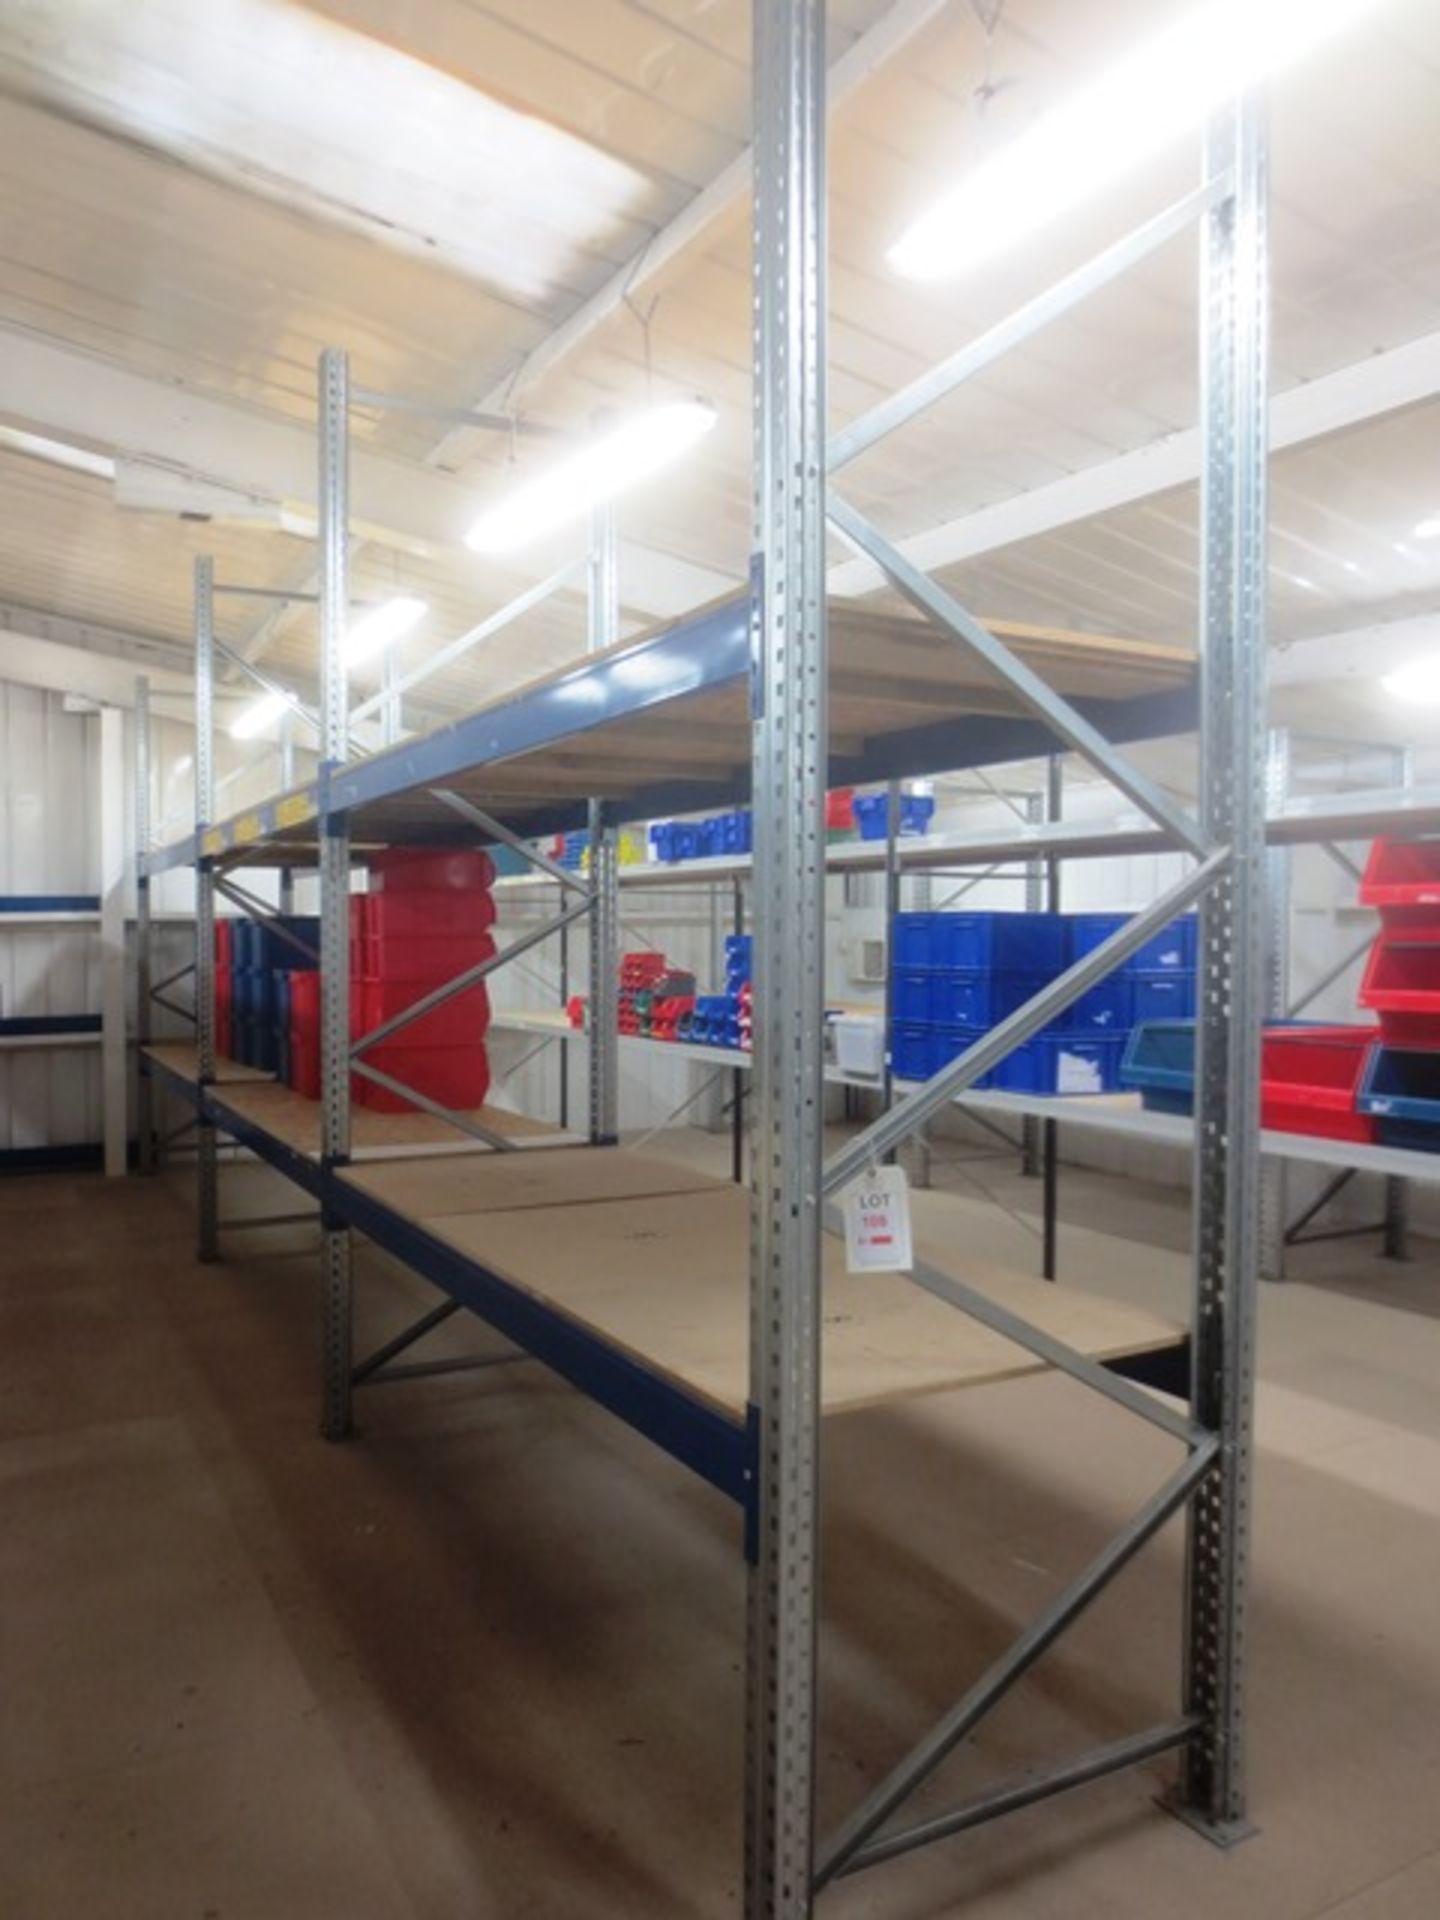 Three bays of adjustable boltless racking (as lotted), approx 2700 x 3600 x 1050mm per bay